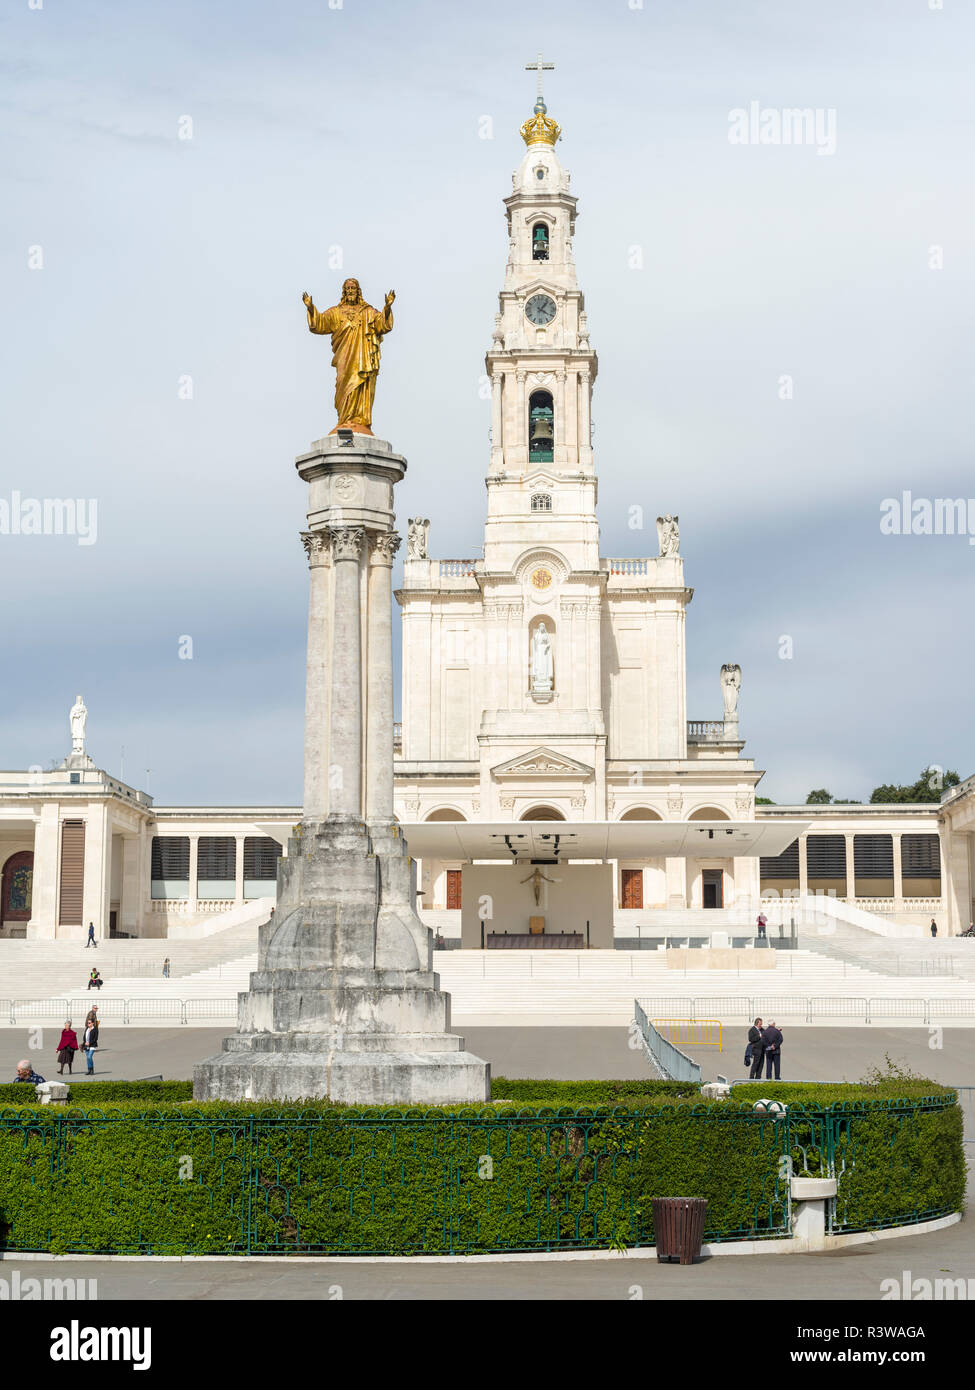 The Basilica of Our Lady of Fatima Rosary. Fatima, a place of pilgrimage. Portugal. Stock Photo